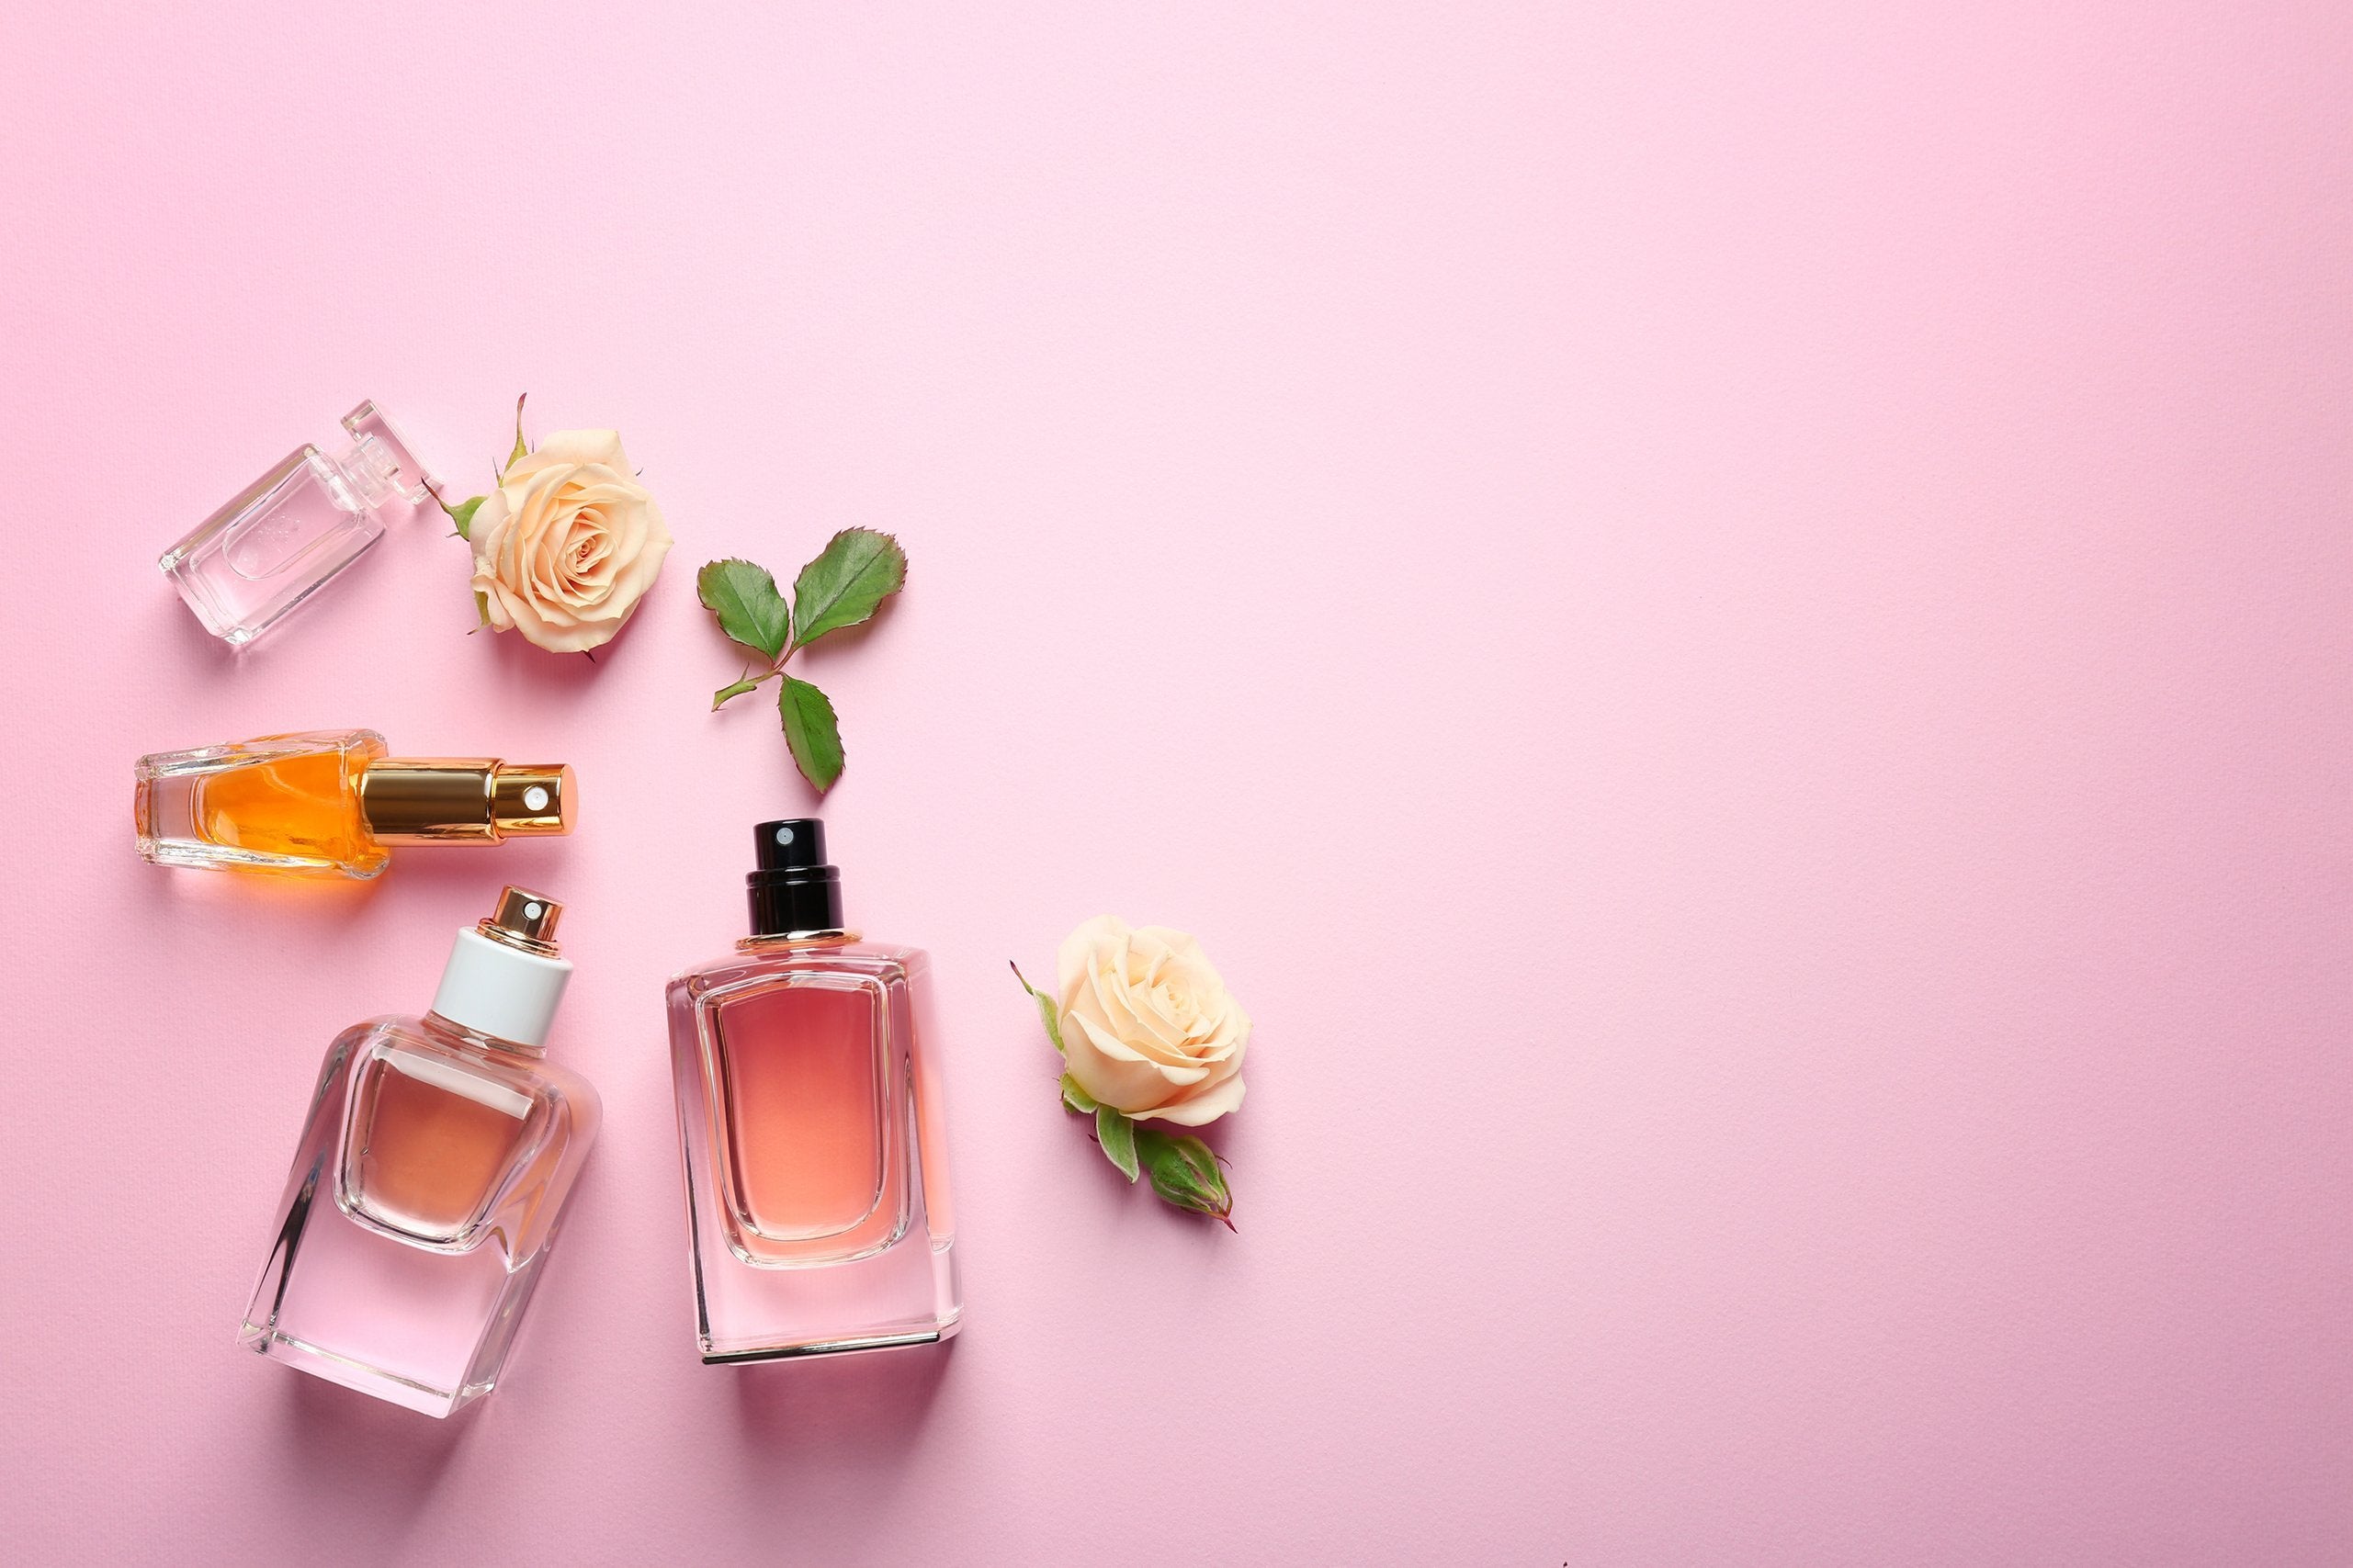 Bestselling Perfumes For Women | My Perfume Shop